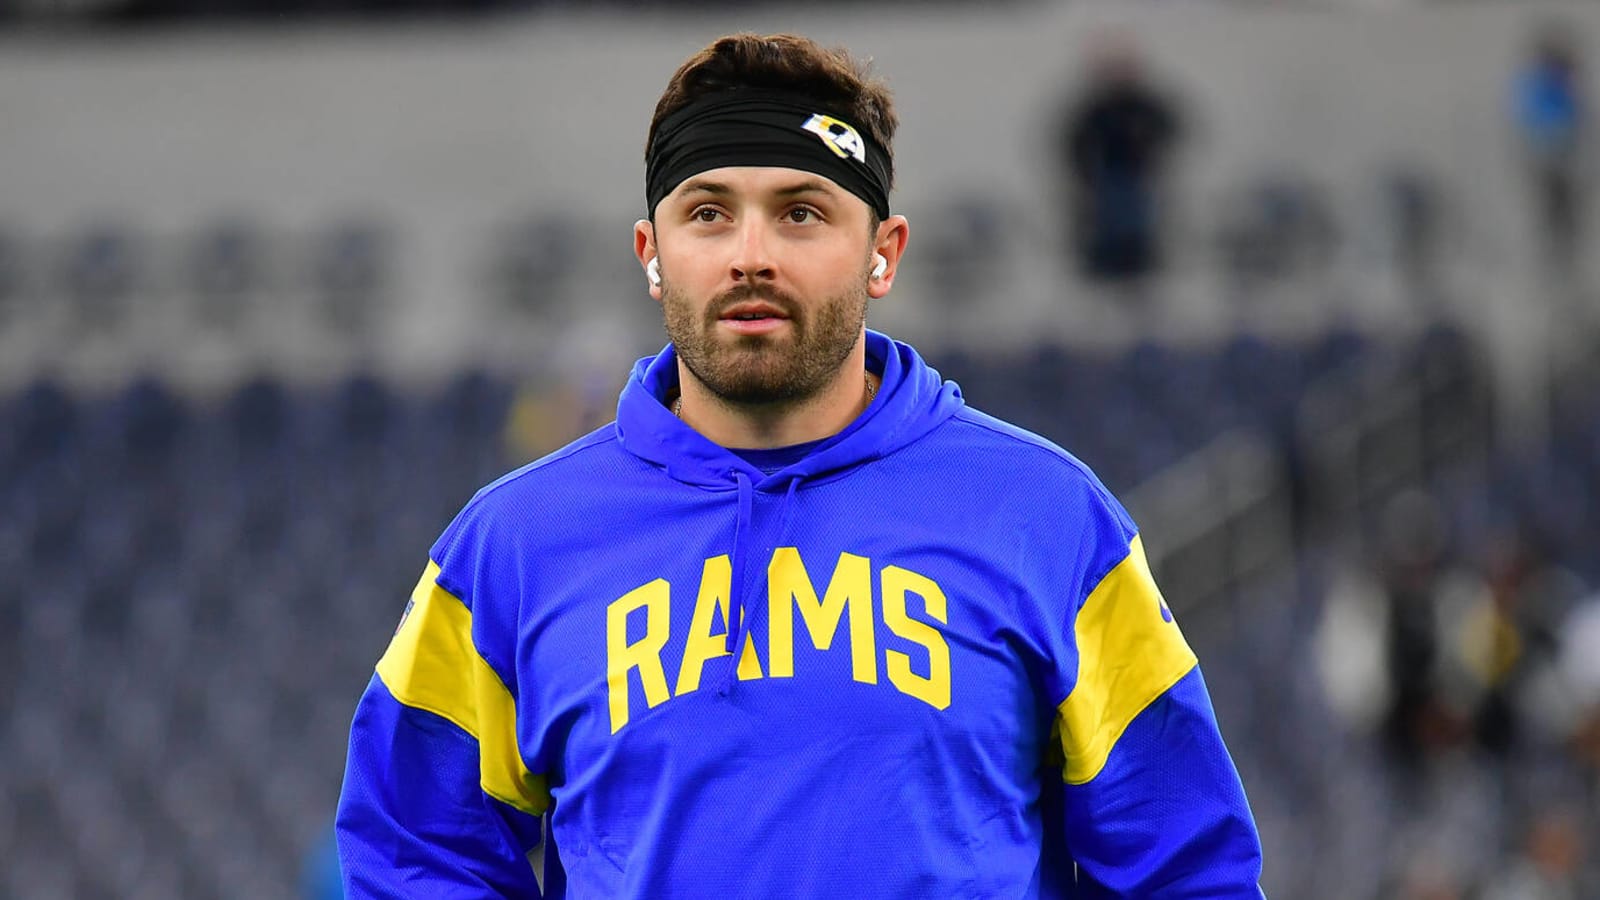 Bucs GM insists Baker Mayfield will compete with Kyle Trask